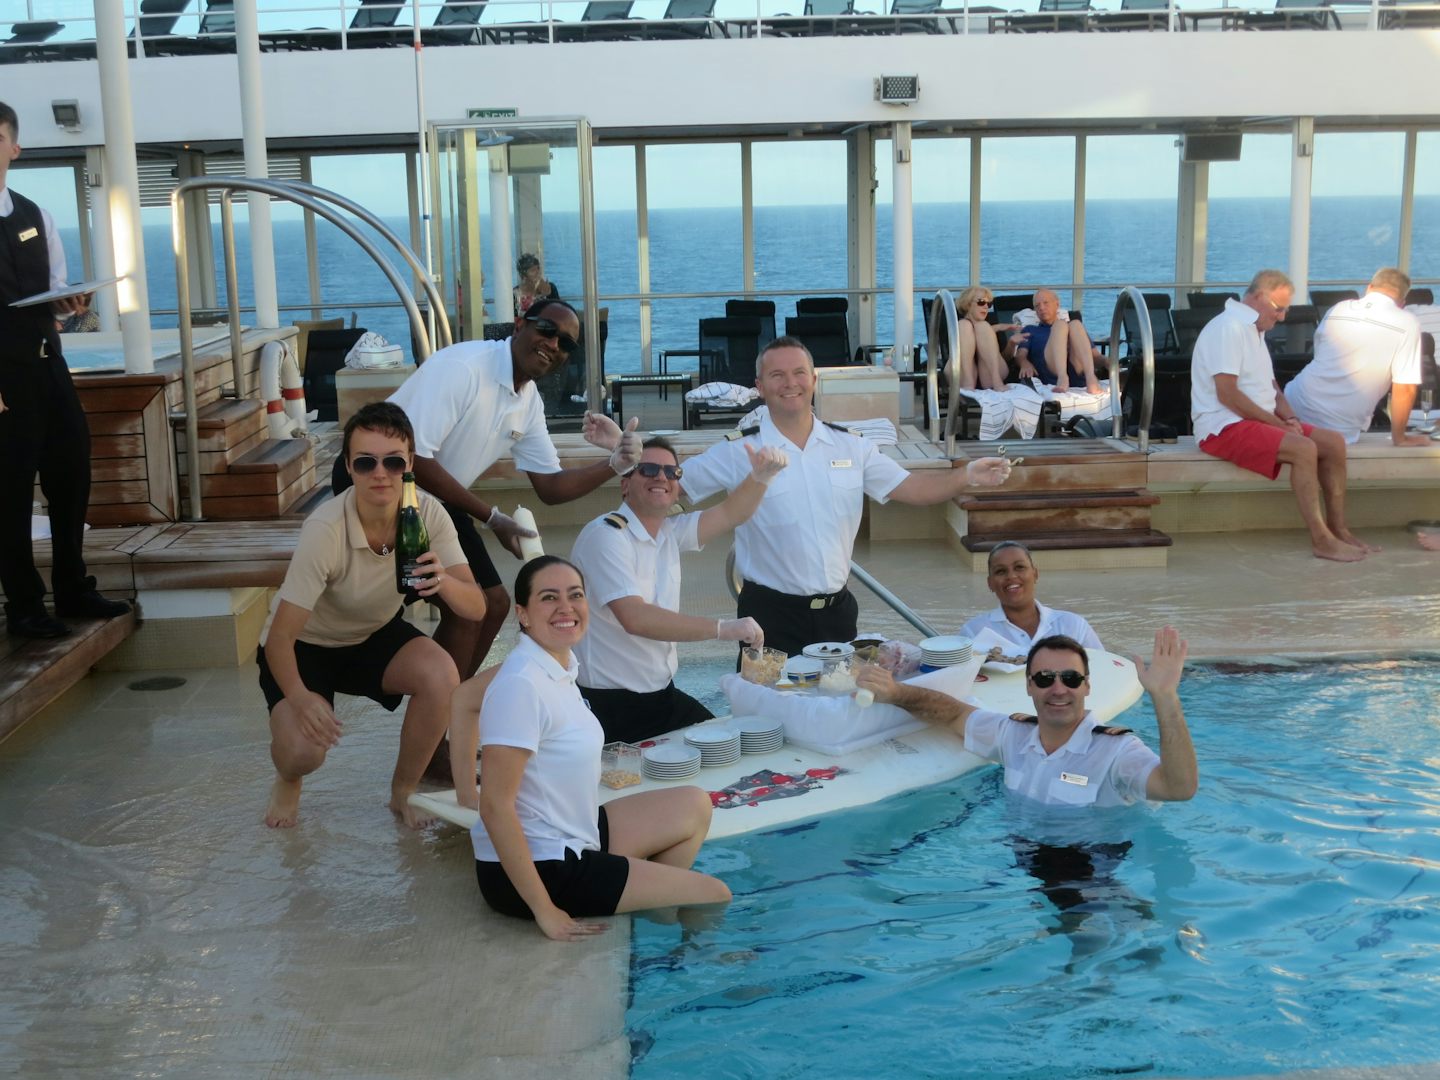 A Seabourn ritual.  Champagne & caviar on a surfboard for everyone!